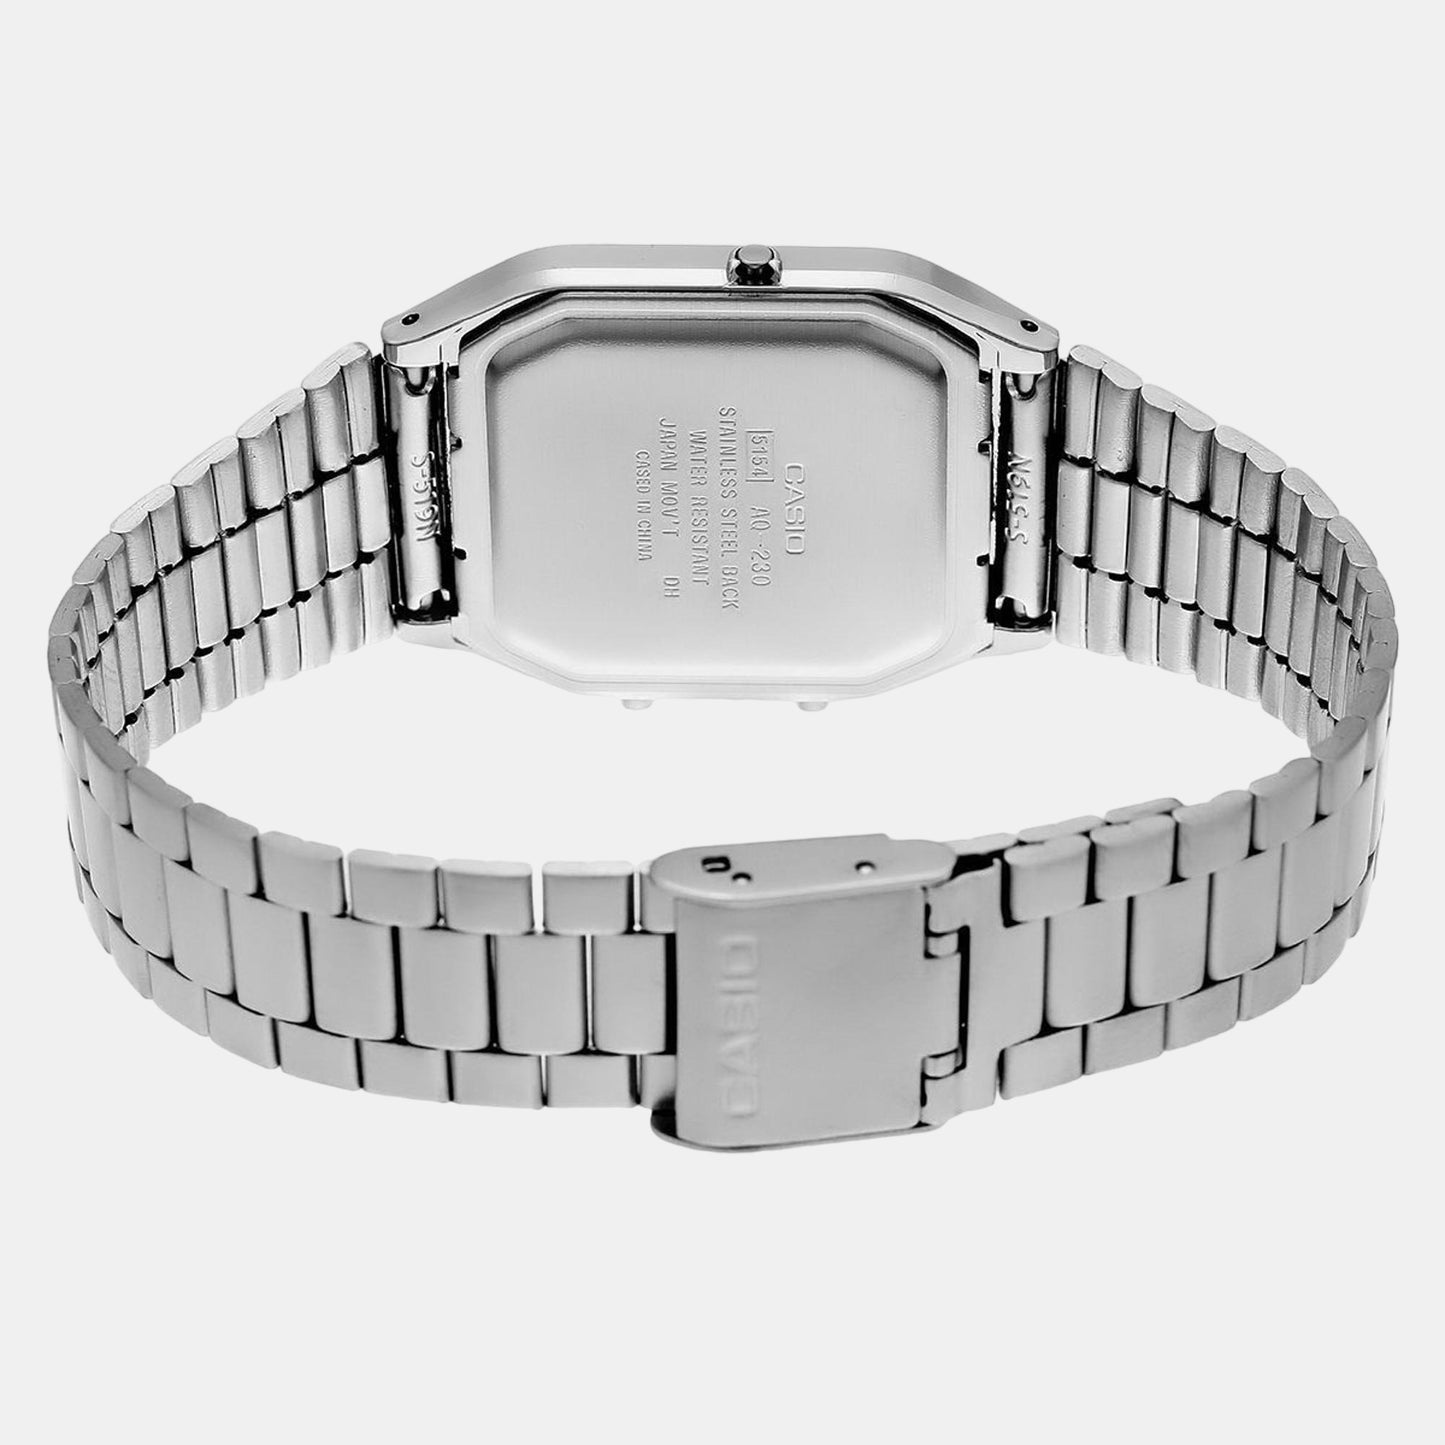 Unisex Analog Stainless Steel Watch AD02